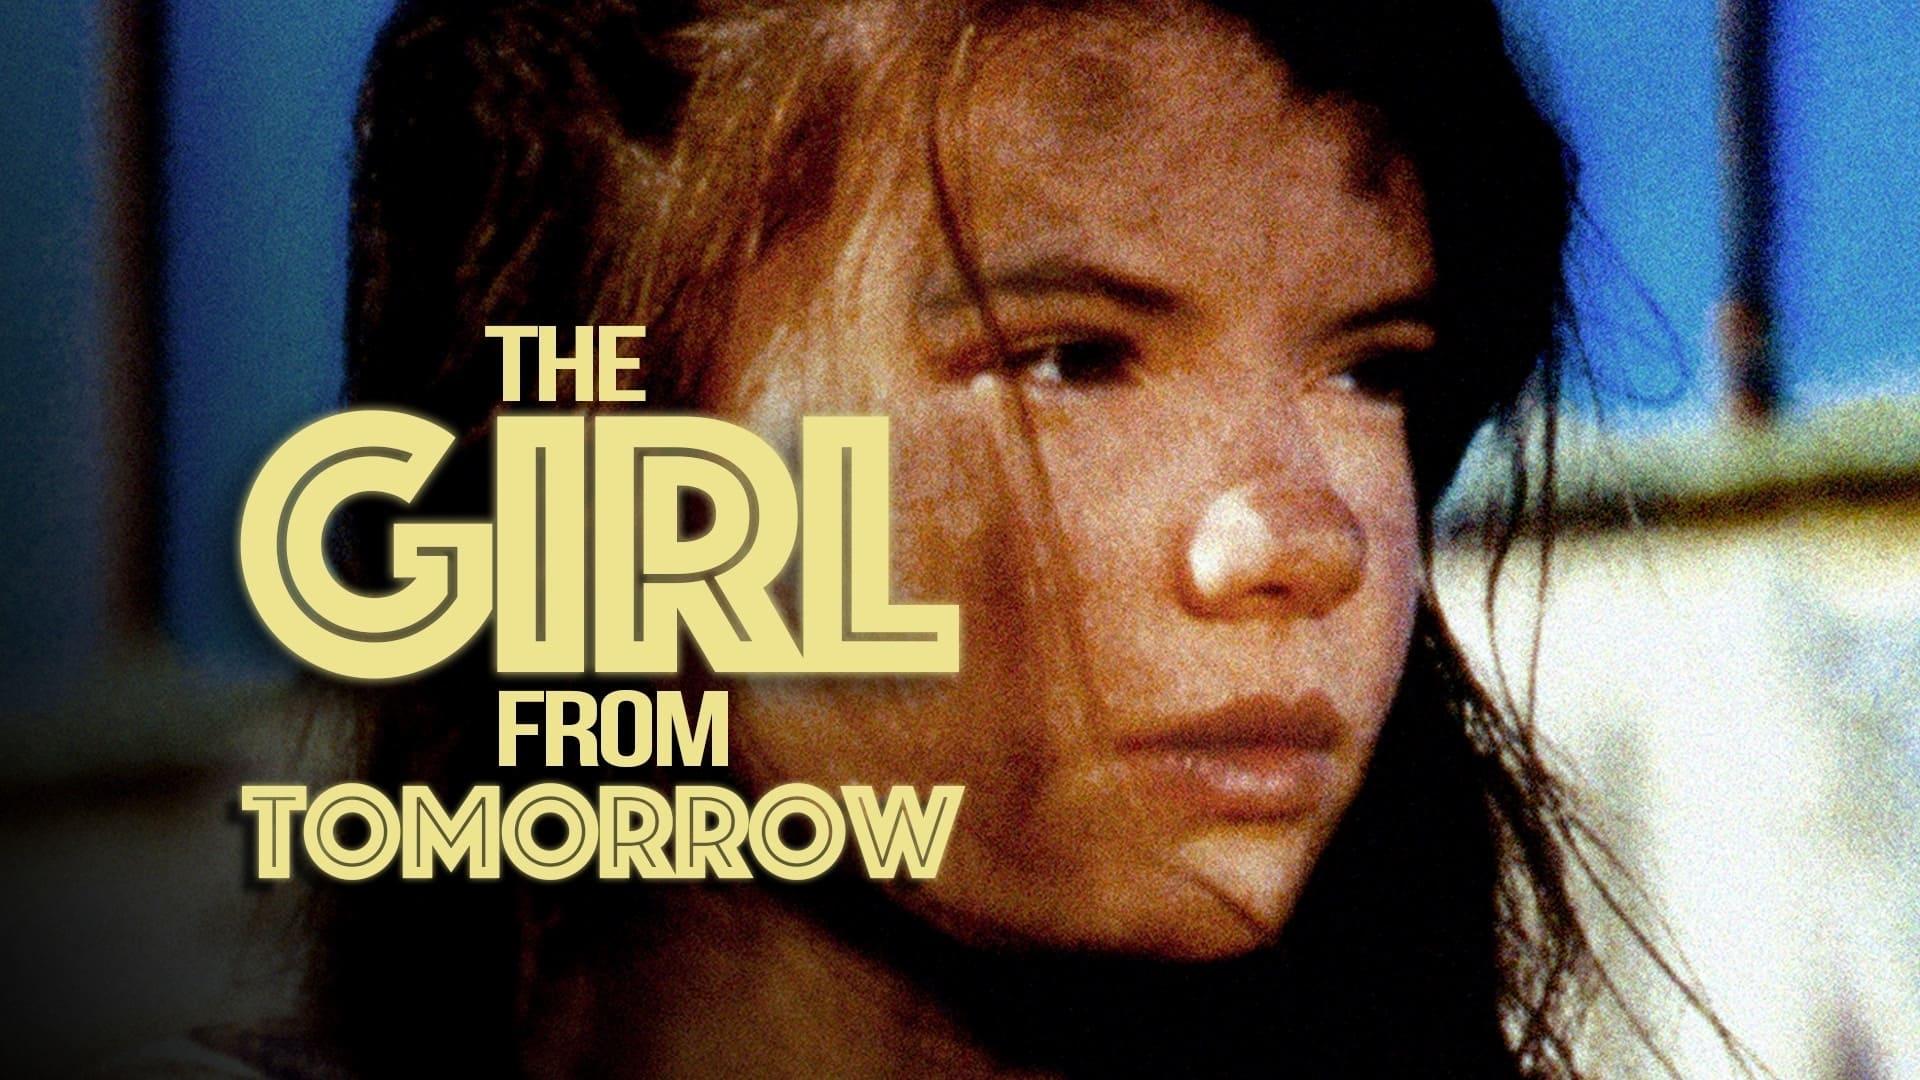 The Girl from Tomorrow backdrop